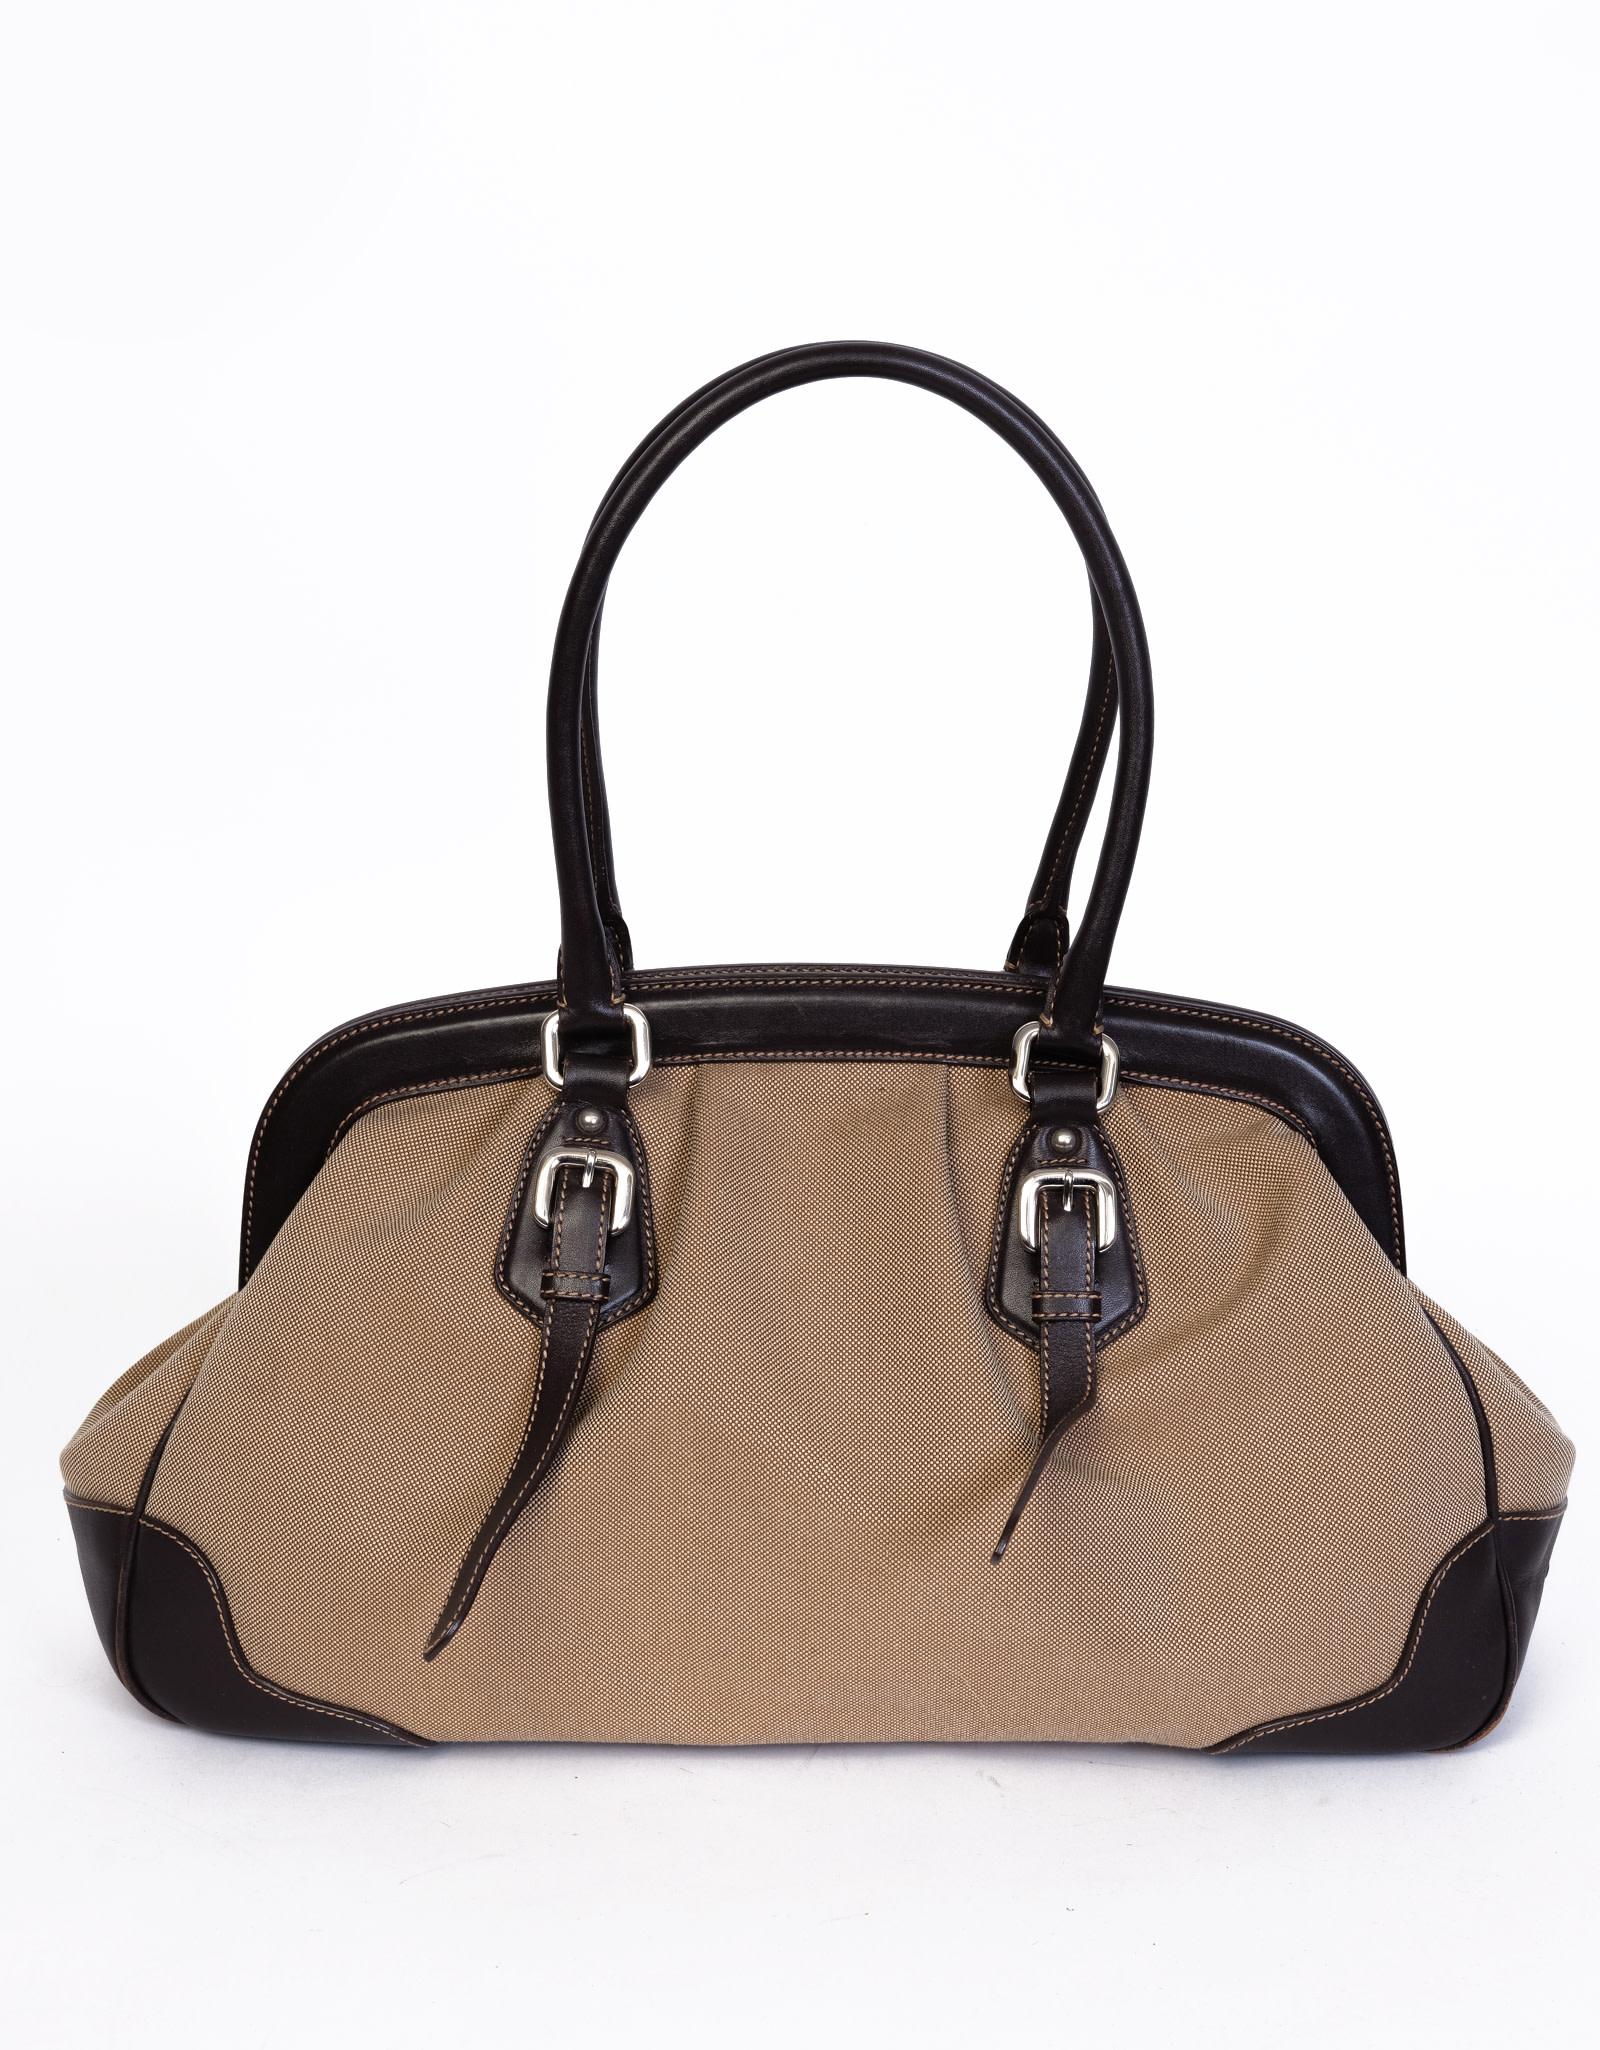 This bag is inspired by the traditional doctor bag style and is made with a durable camel canvas. Featuring logo embroidery at the front, dark brown cowhide leather finishes, dual flat top handles that attach to the bag via sliver tone links, top